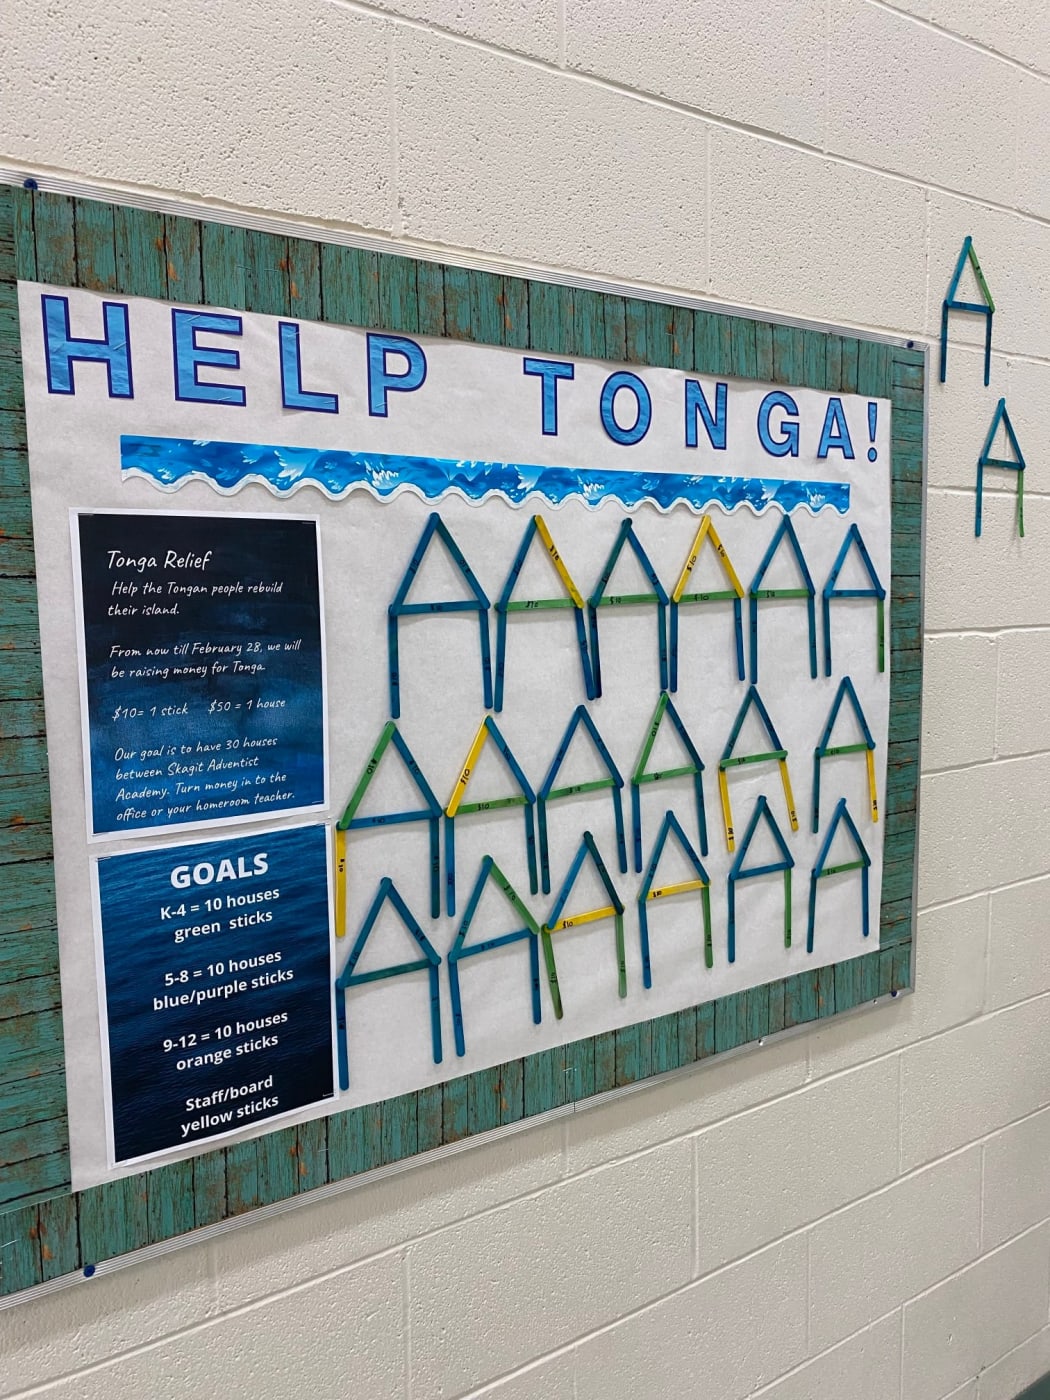 A Help Tonga poster at Skagit Adventist Academy